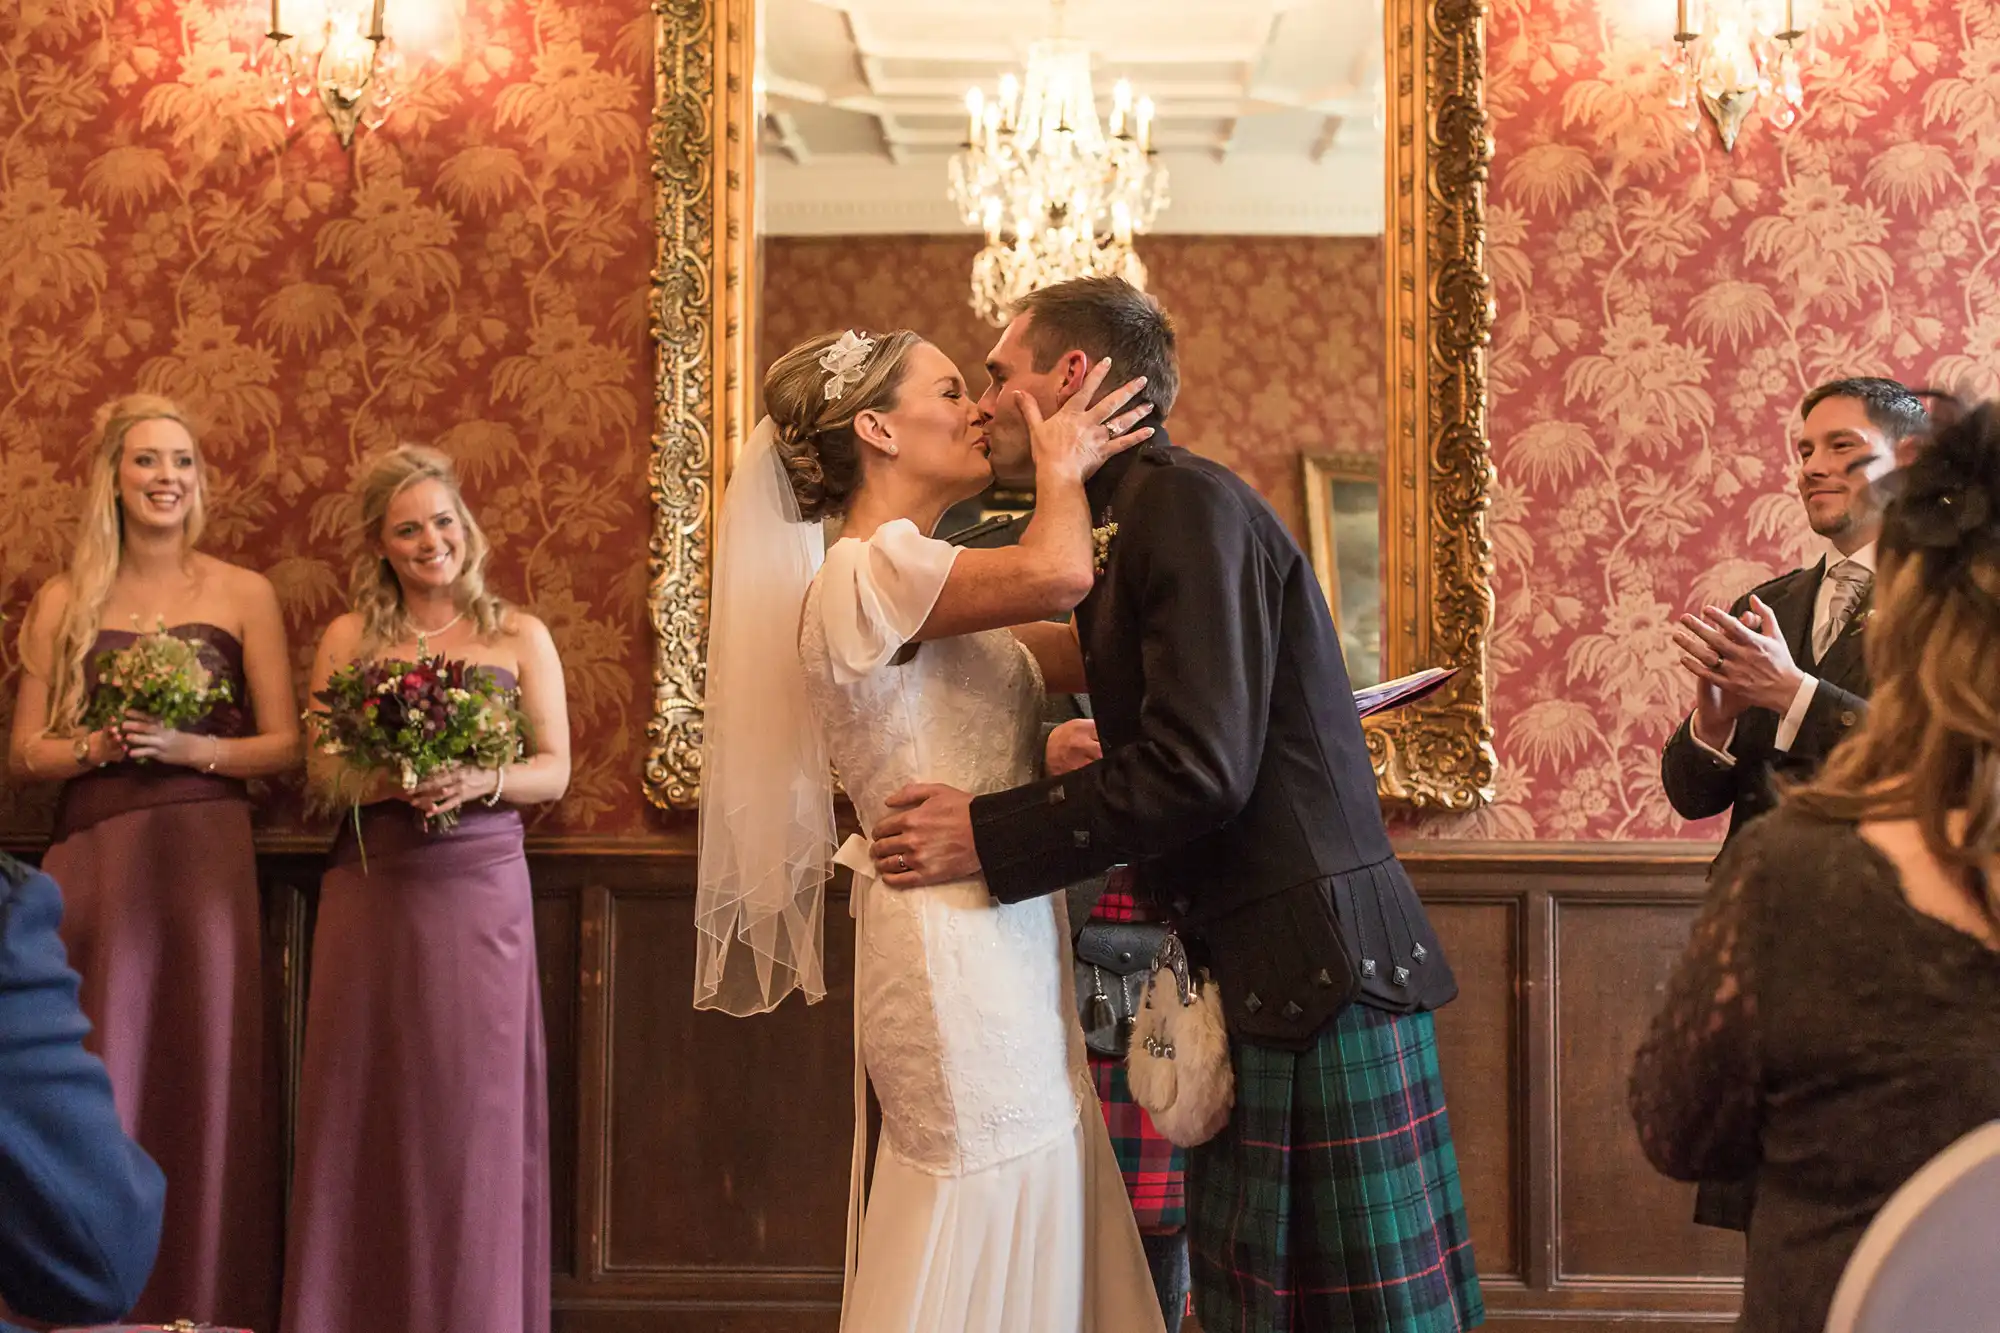 A bride in a white dress and a groom in a kilt kiss passionately in a room with elegantly dressed guests looking on.